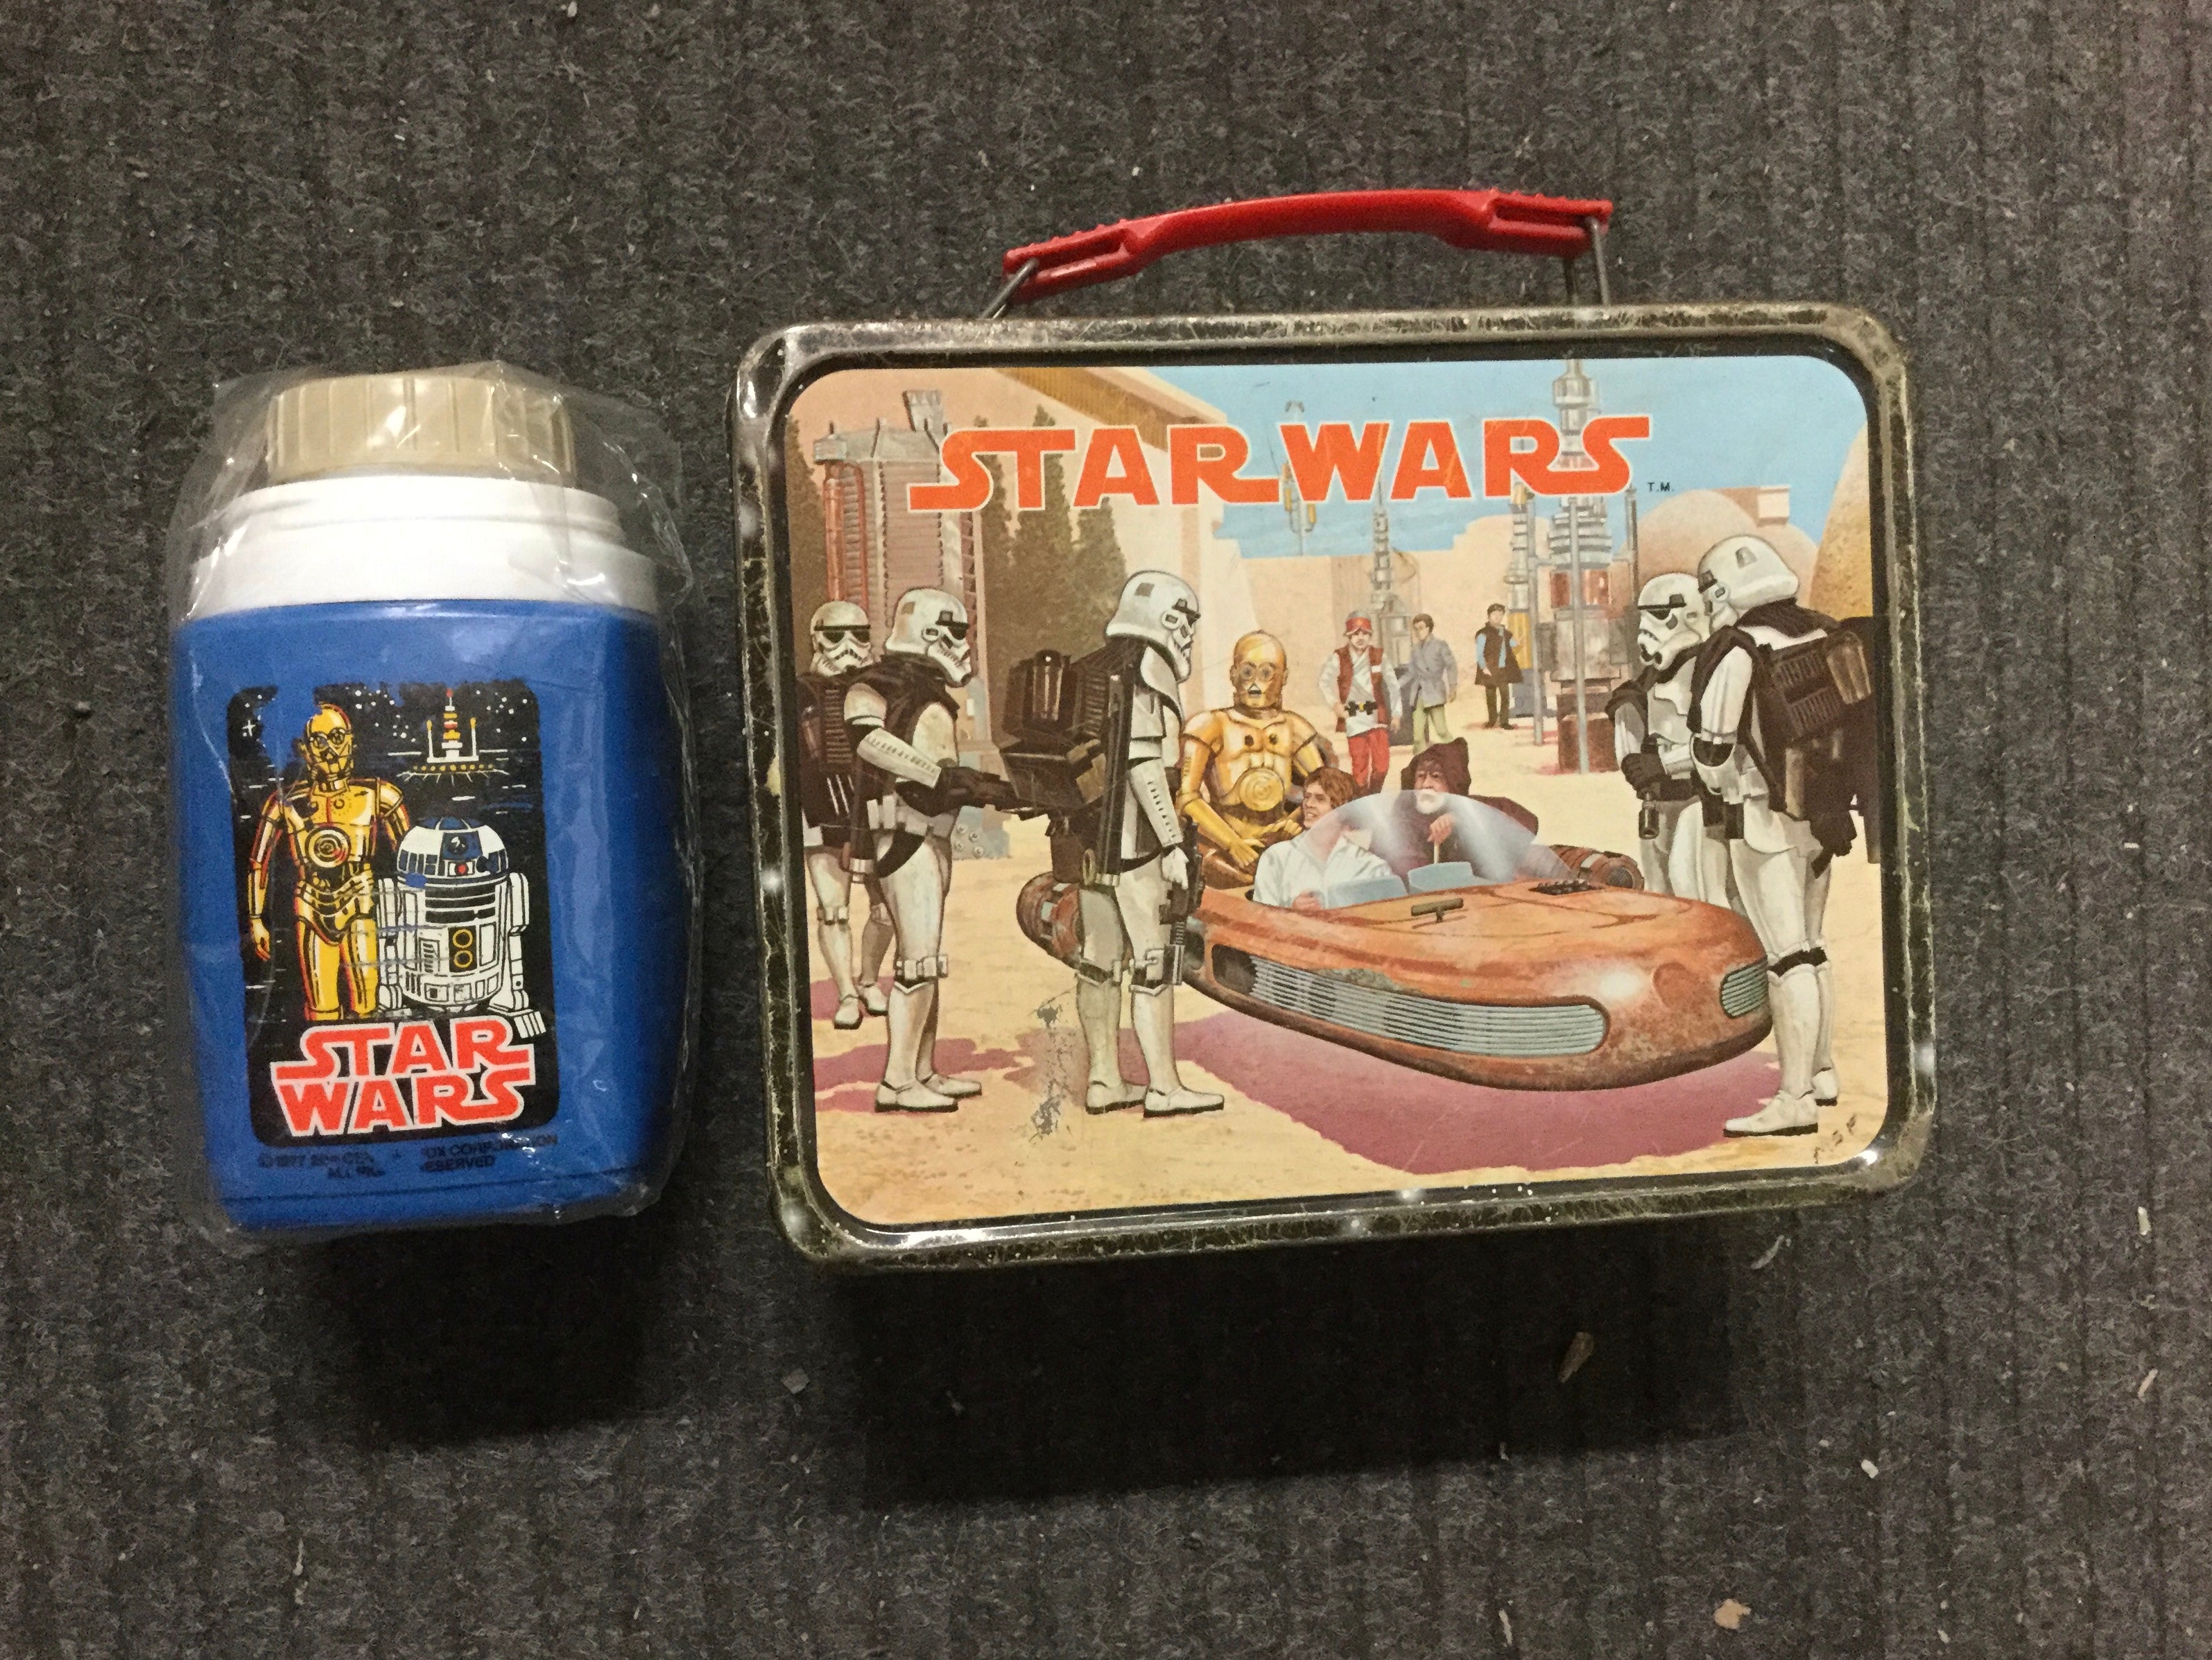 Star Wars movie metal lunch box with Thermos 1977